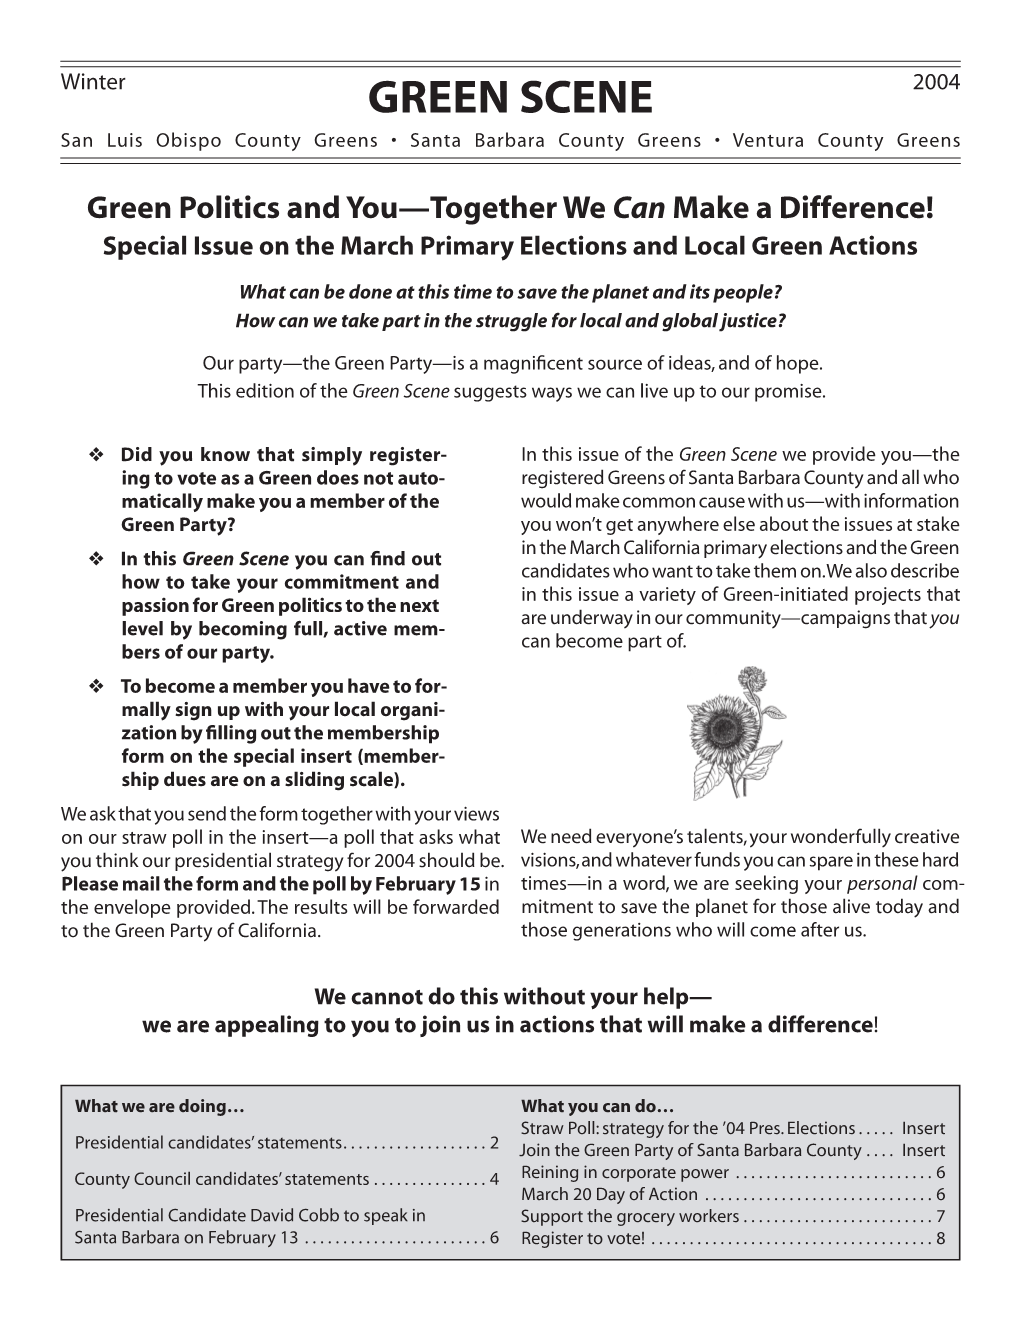 GREEN SCENE Elections for County Council